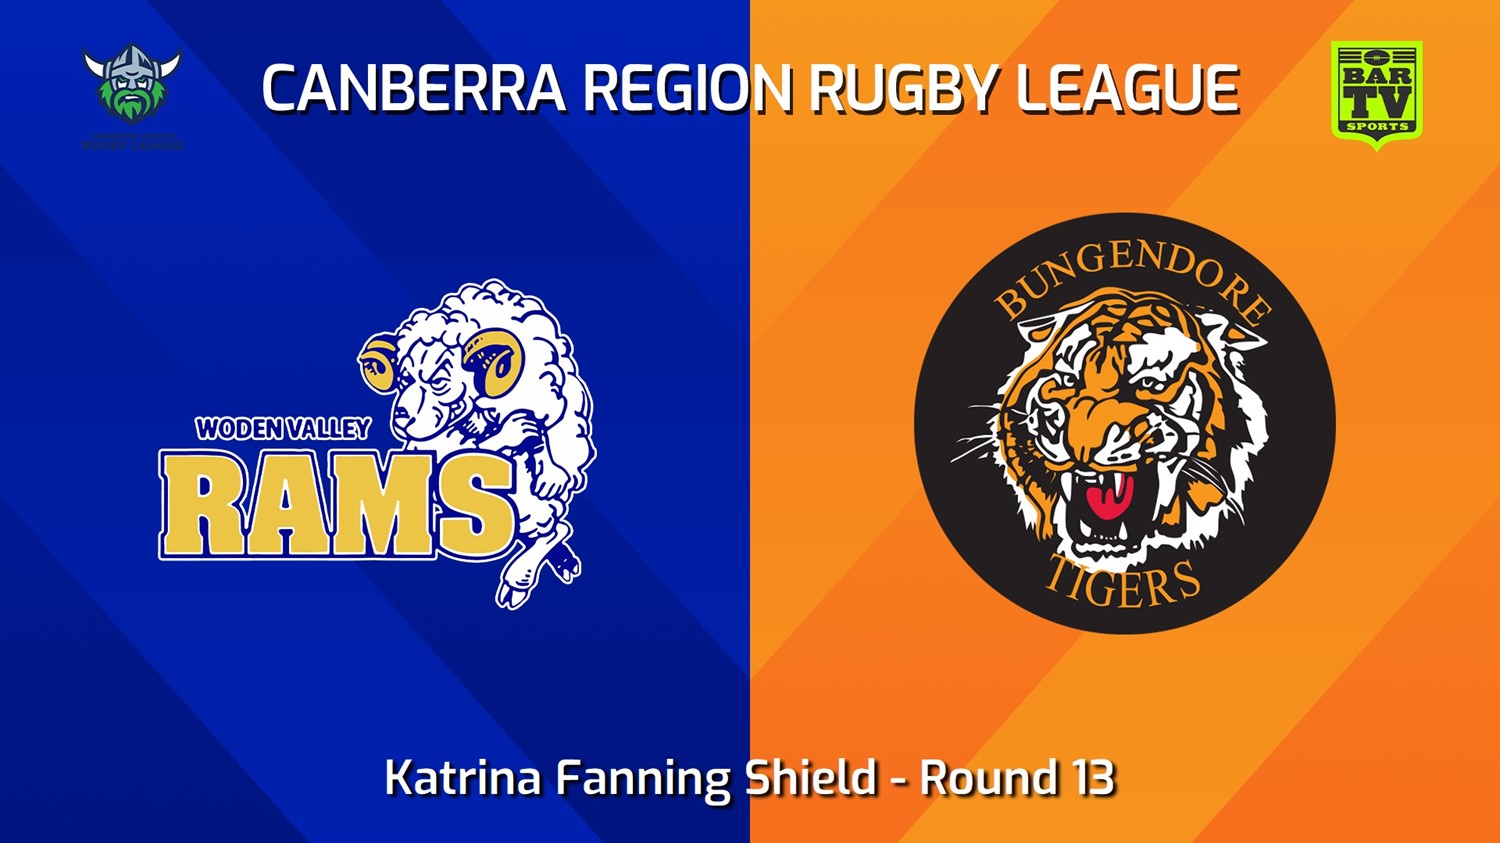 240706-video-Canberra Round 13 - Katrina Fanning Shield - Woden Valley Rams v Bungendore Tigers Slate Image